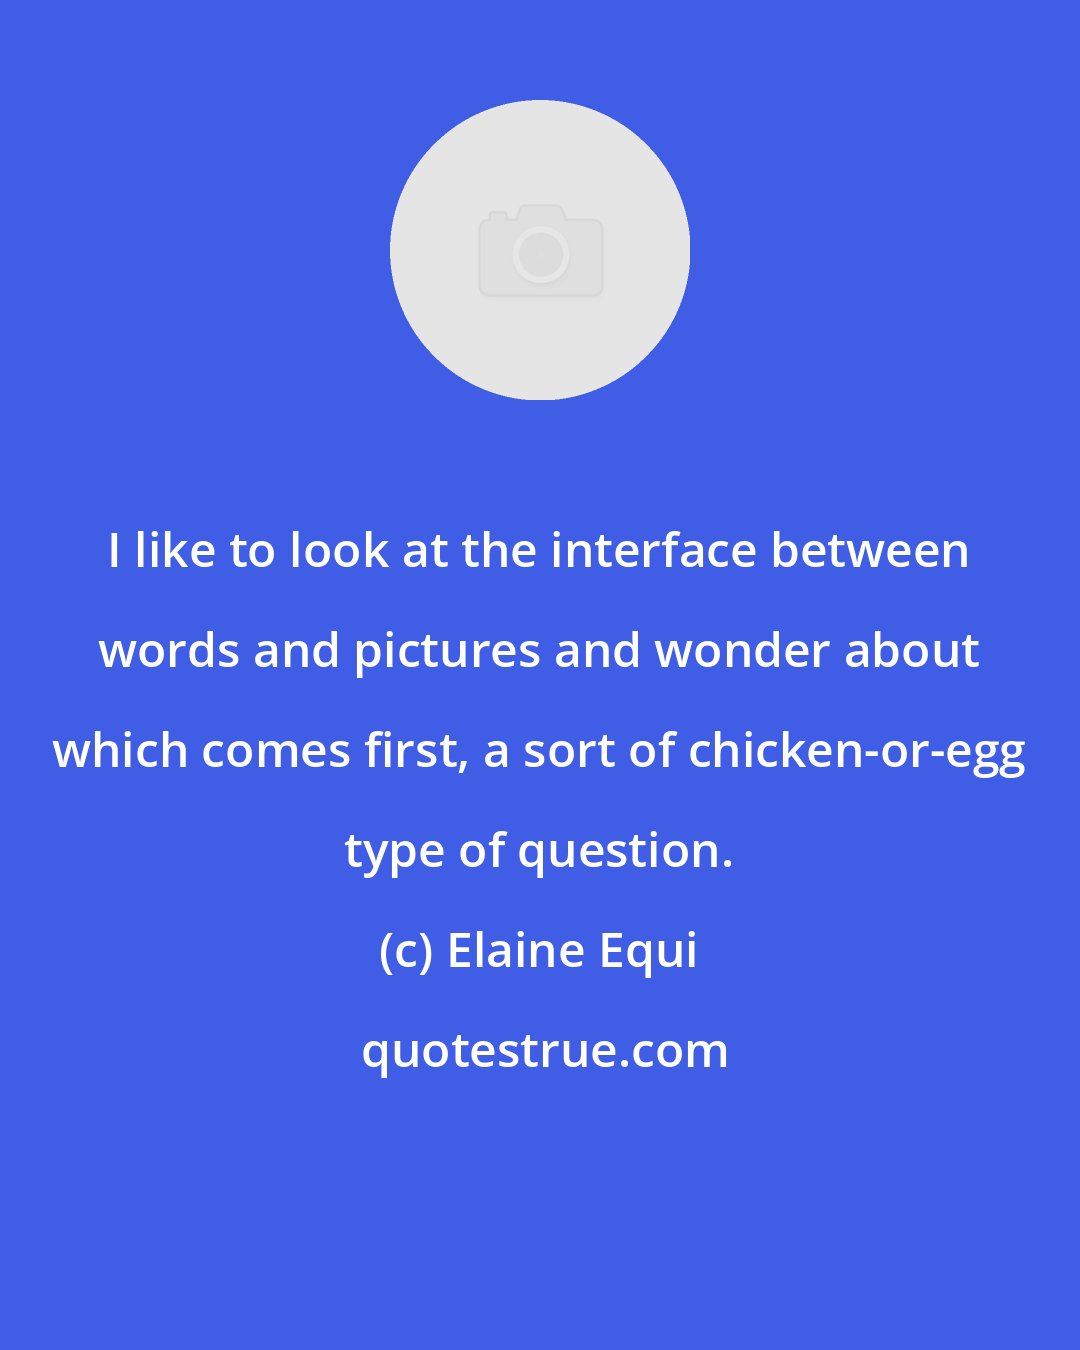 Elaine Equi: I like to look at the interface between words and pictures and wonder about which comes first, a sort of chicken-or-egg type of question.